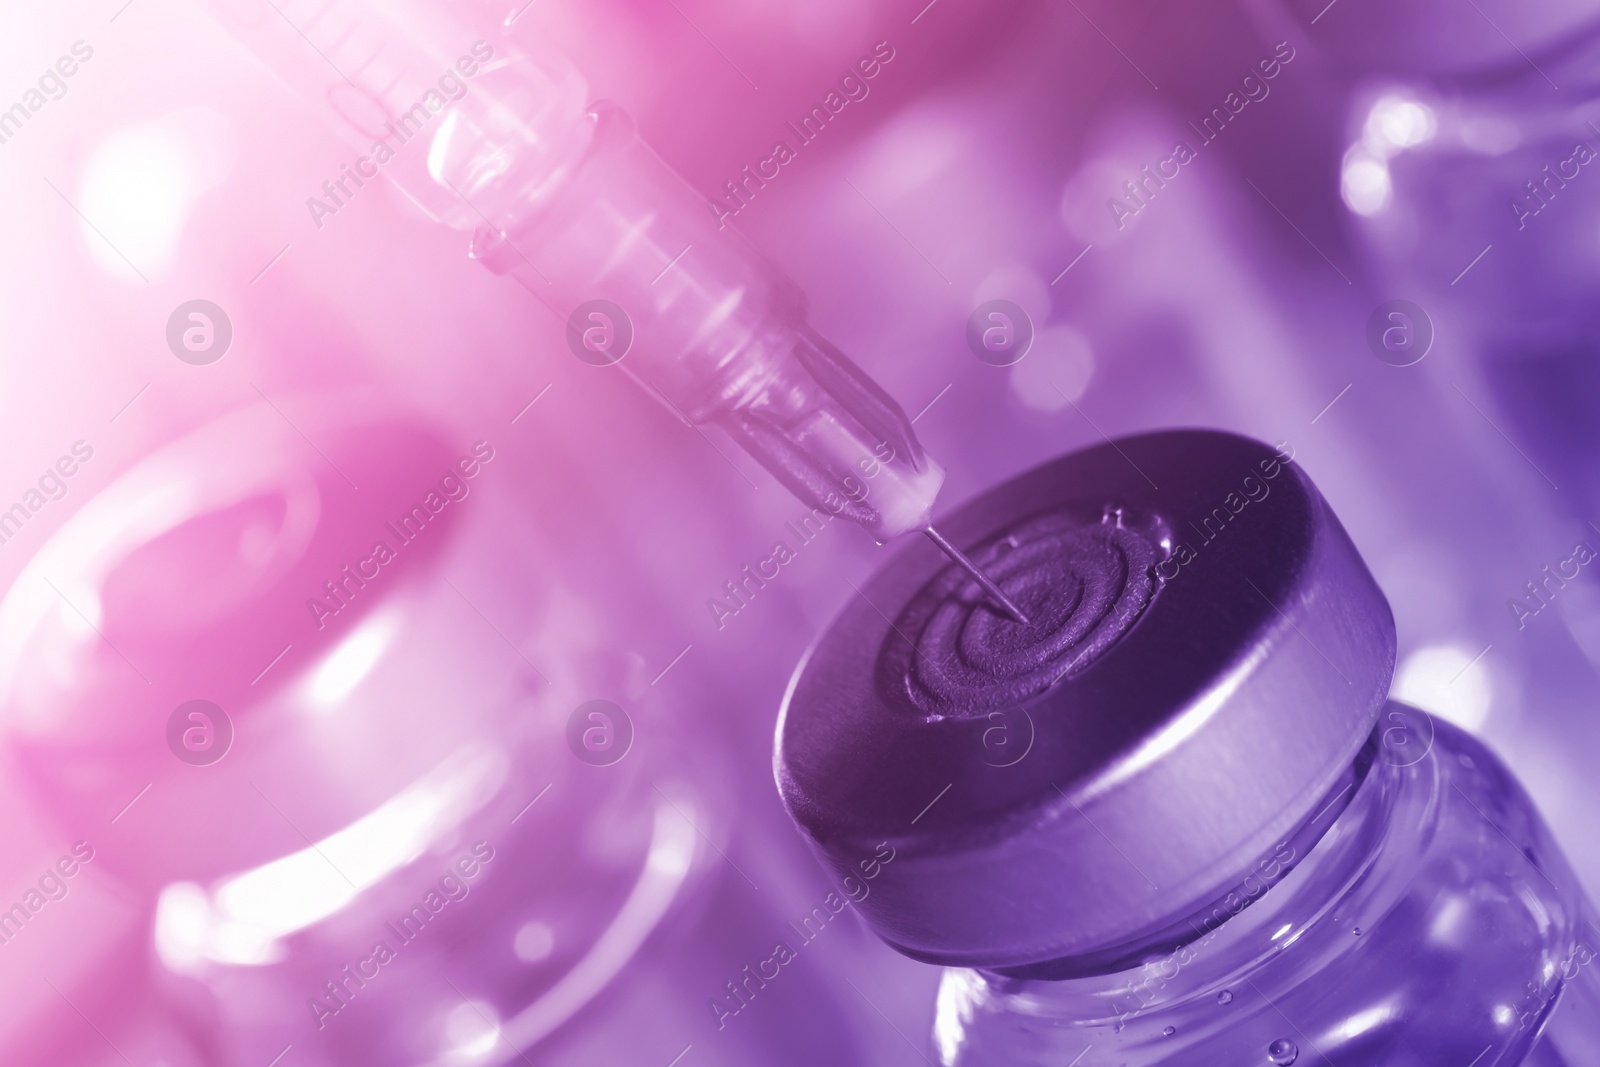 Image of Filling syringe with medicine from vial against blurred background, closeup. Color toned